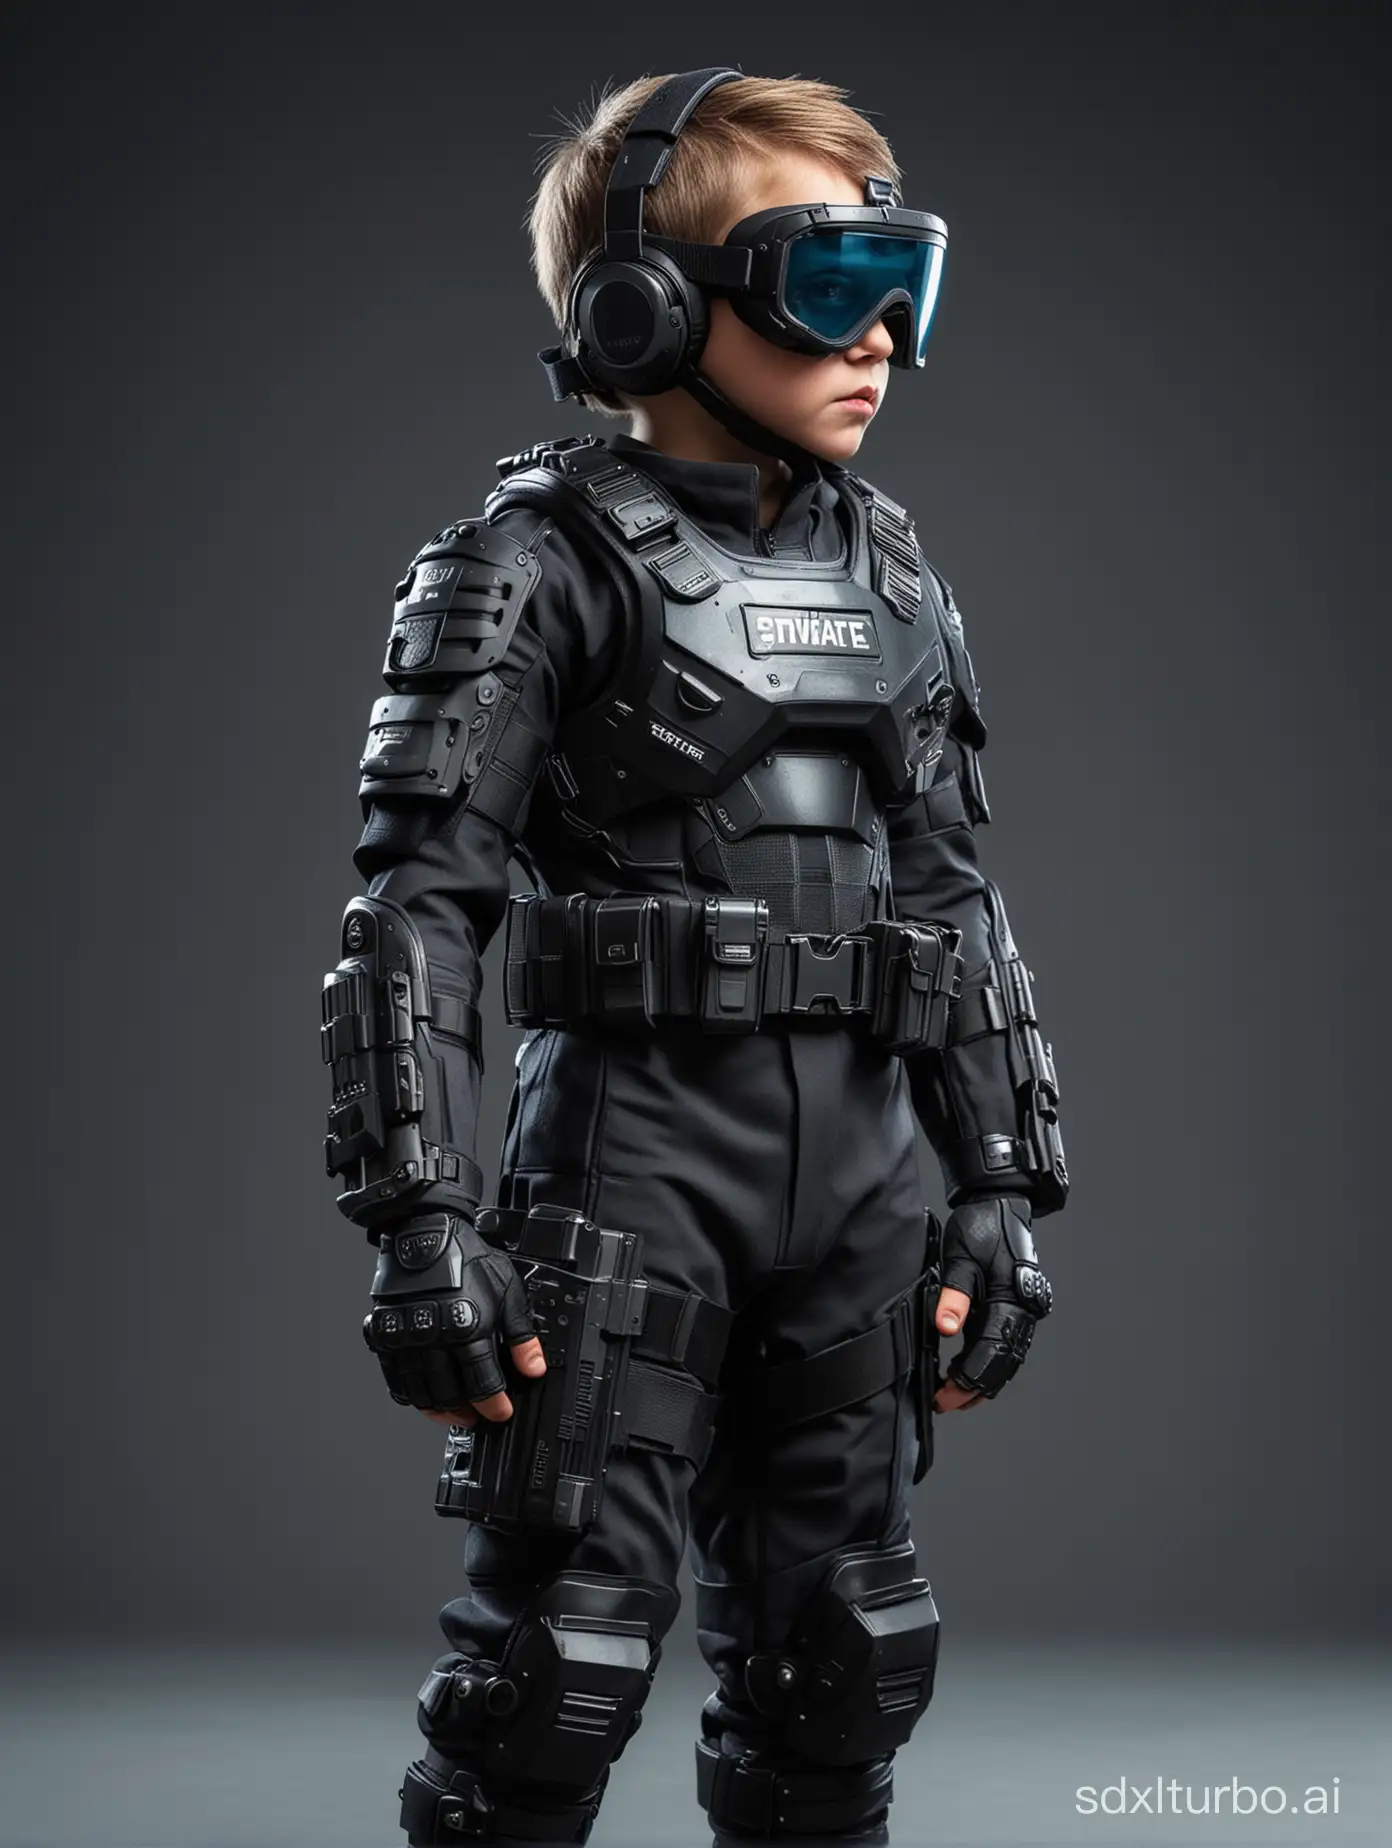 Child-in-SWAT-Uniform-with-HighTech-Gear-and-Tactical-Equipment